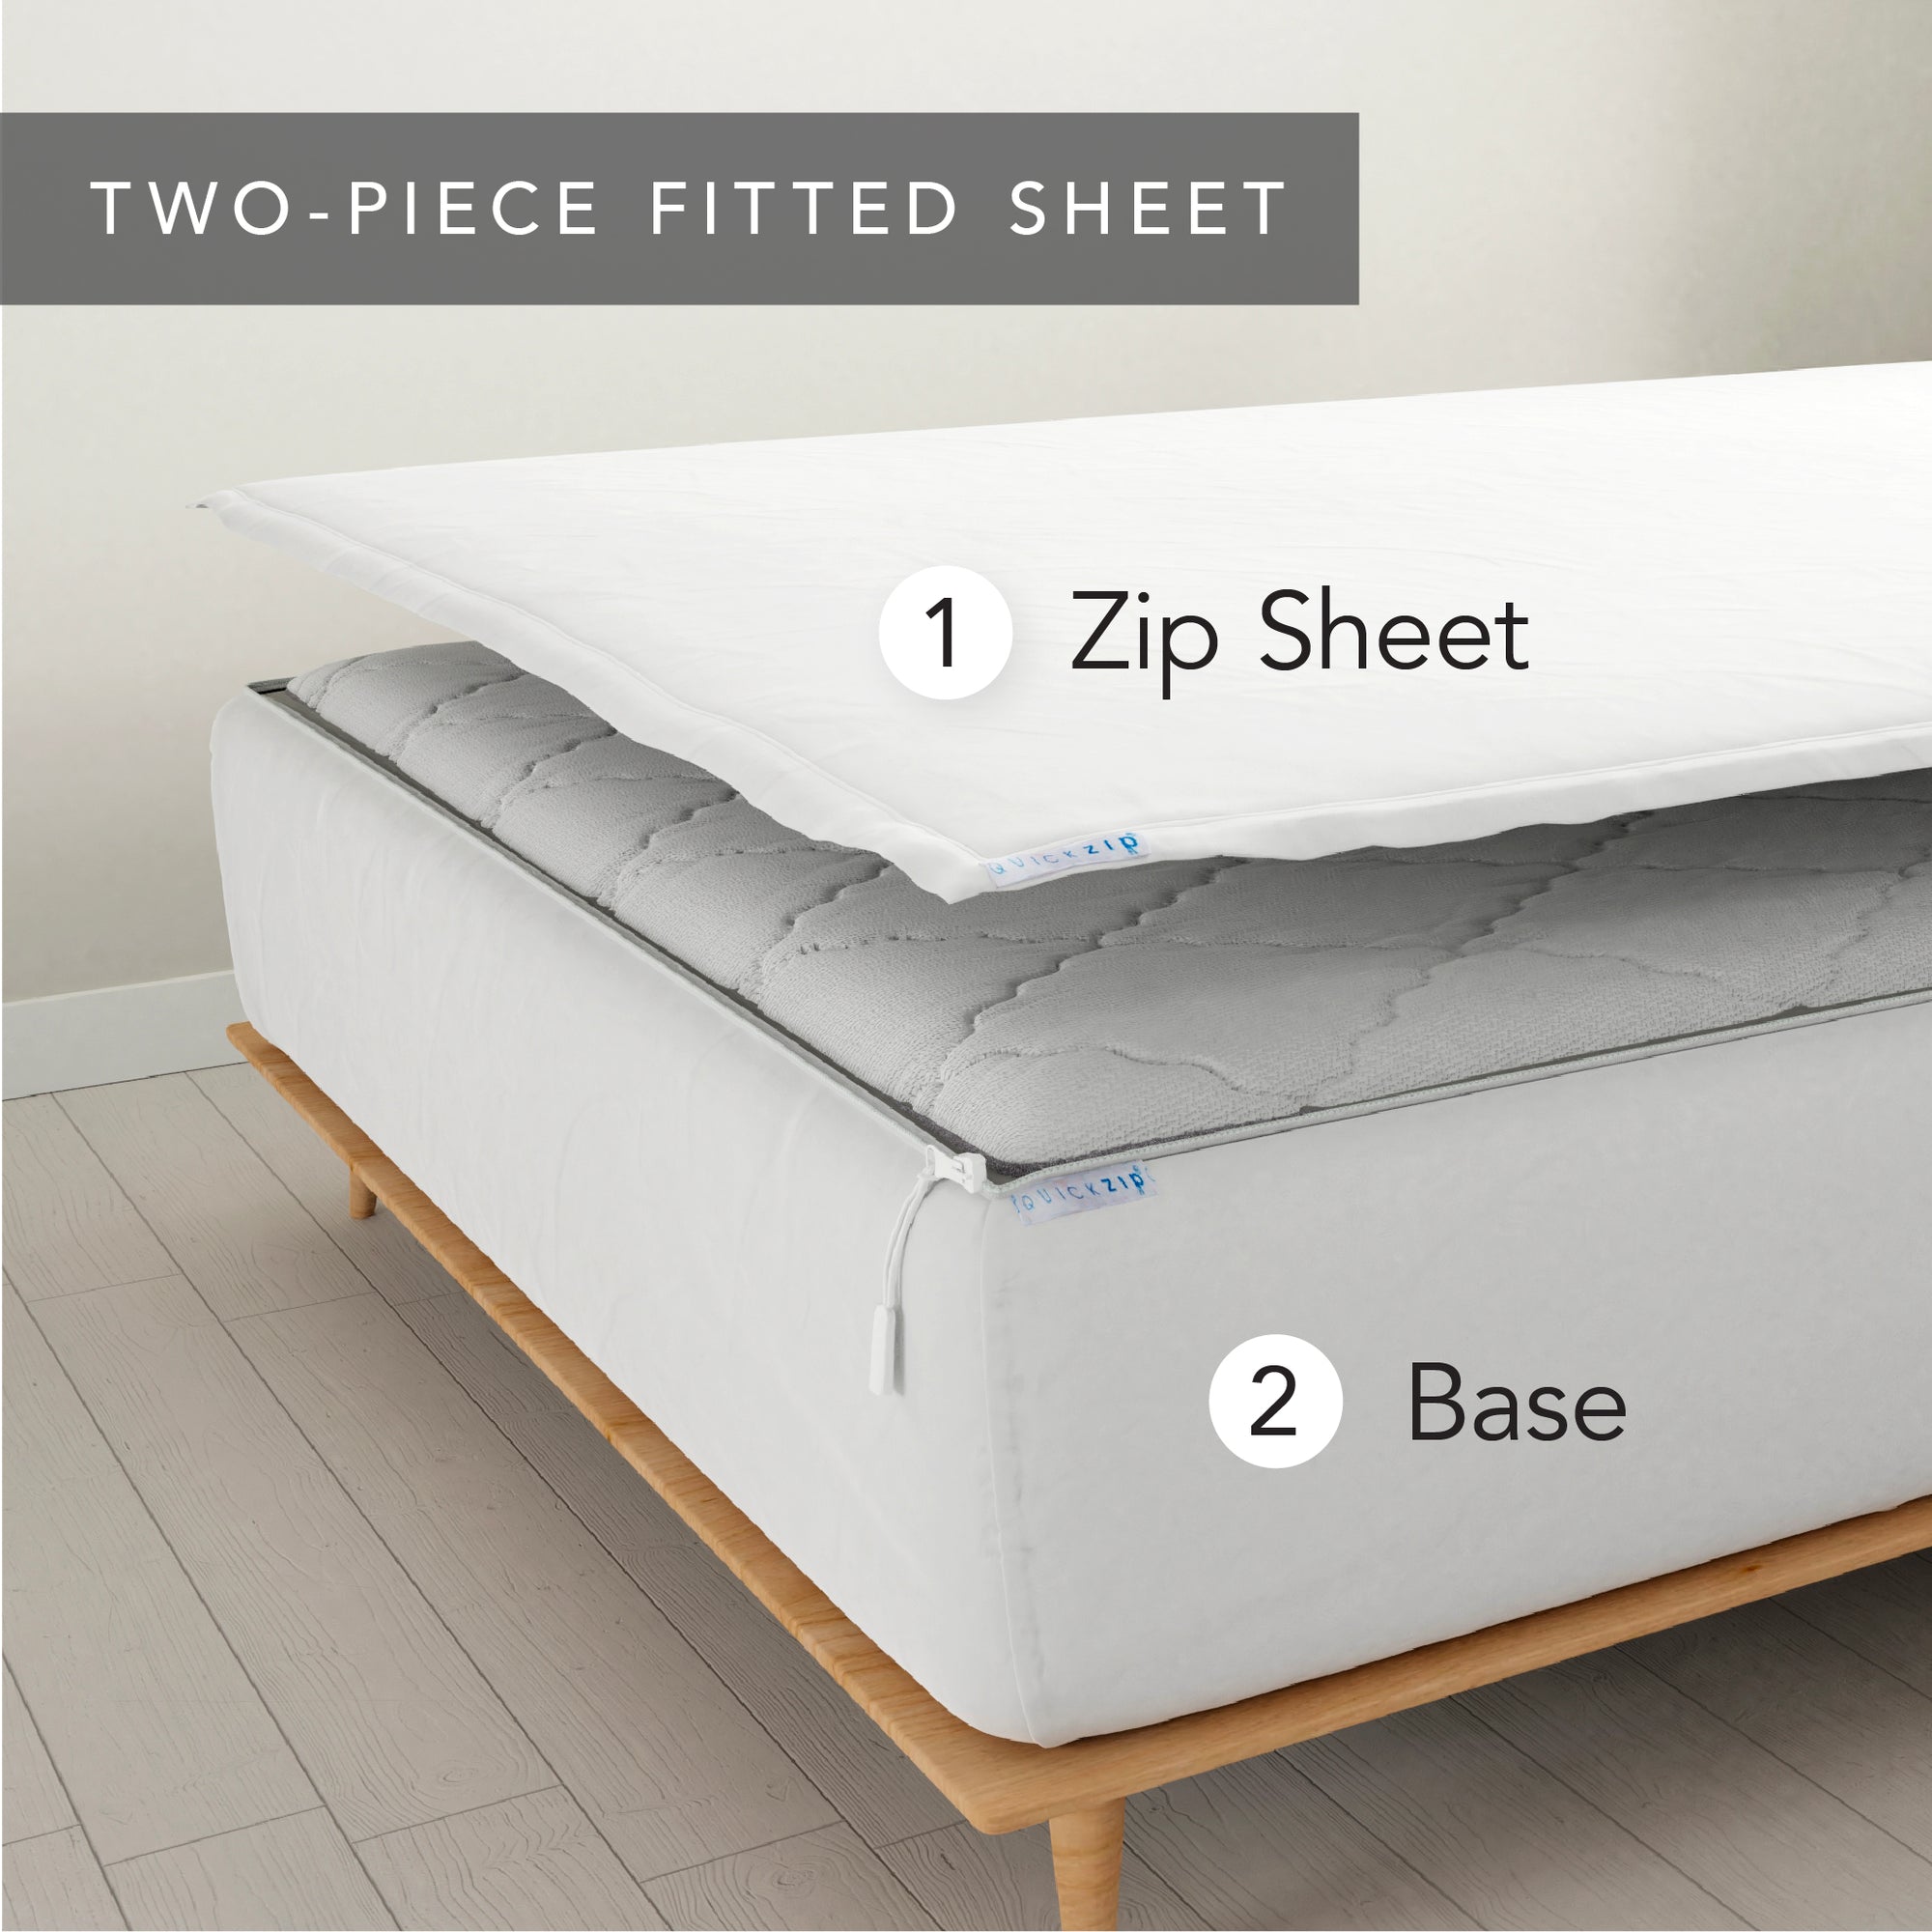 The Quickzip Fitted Sheet System